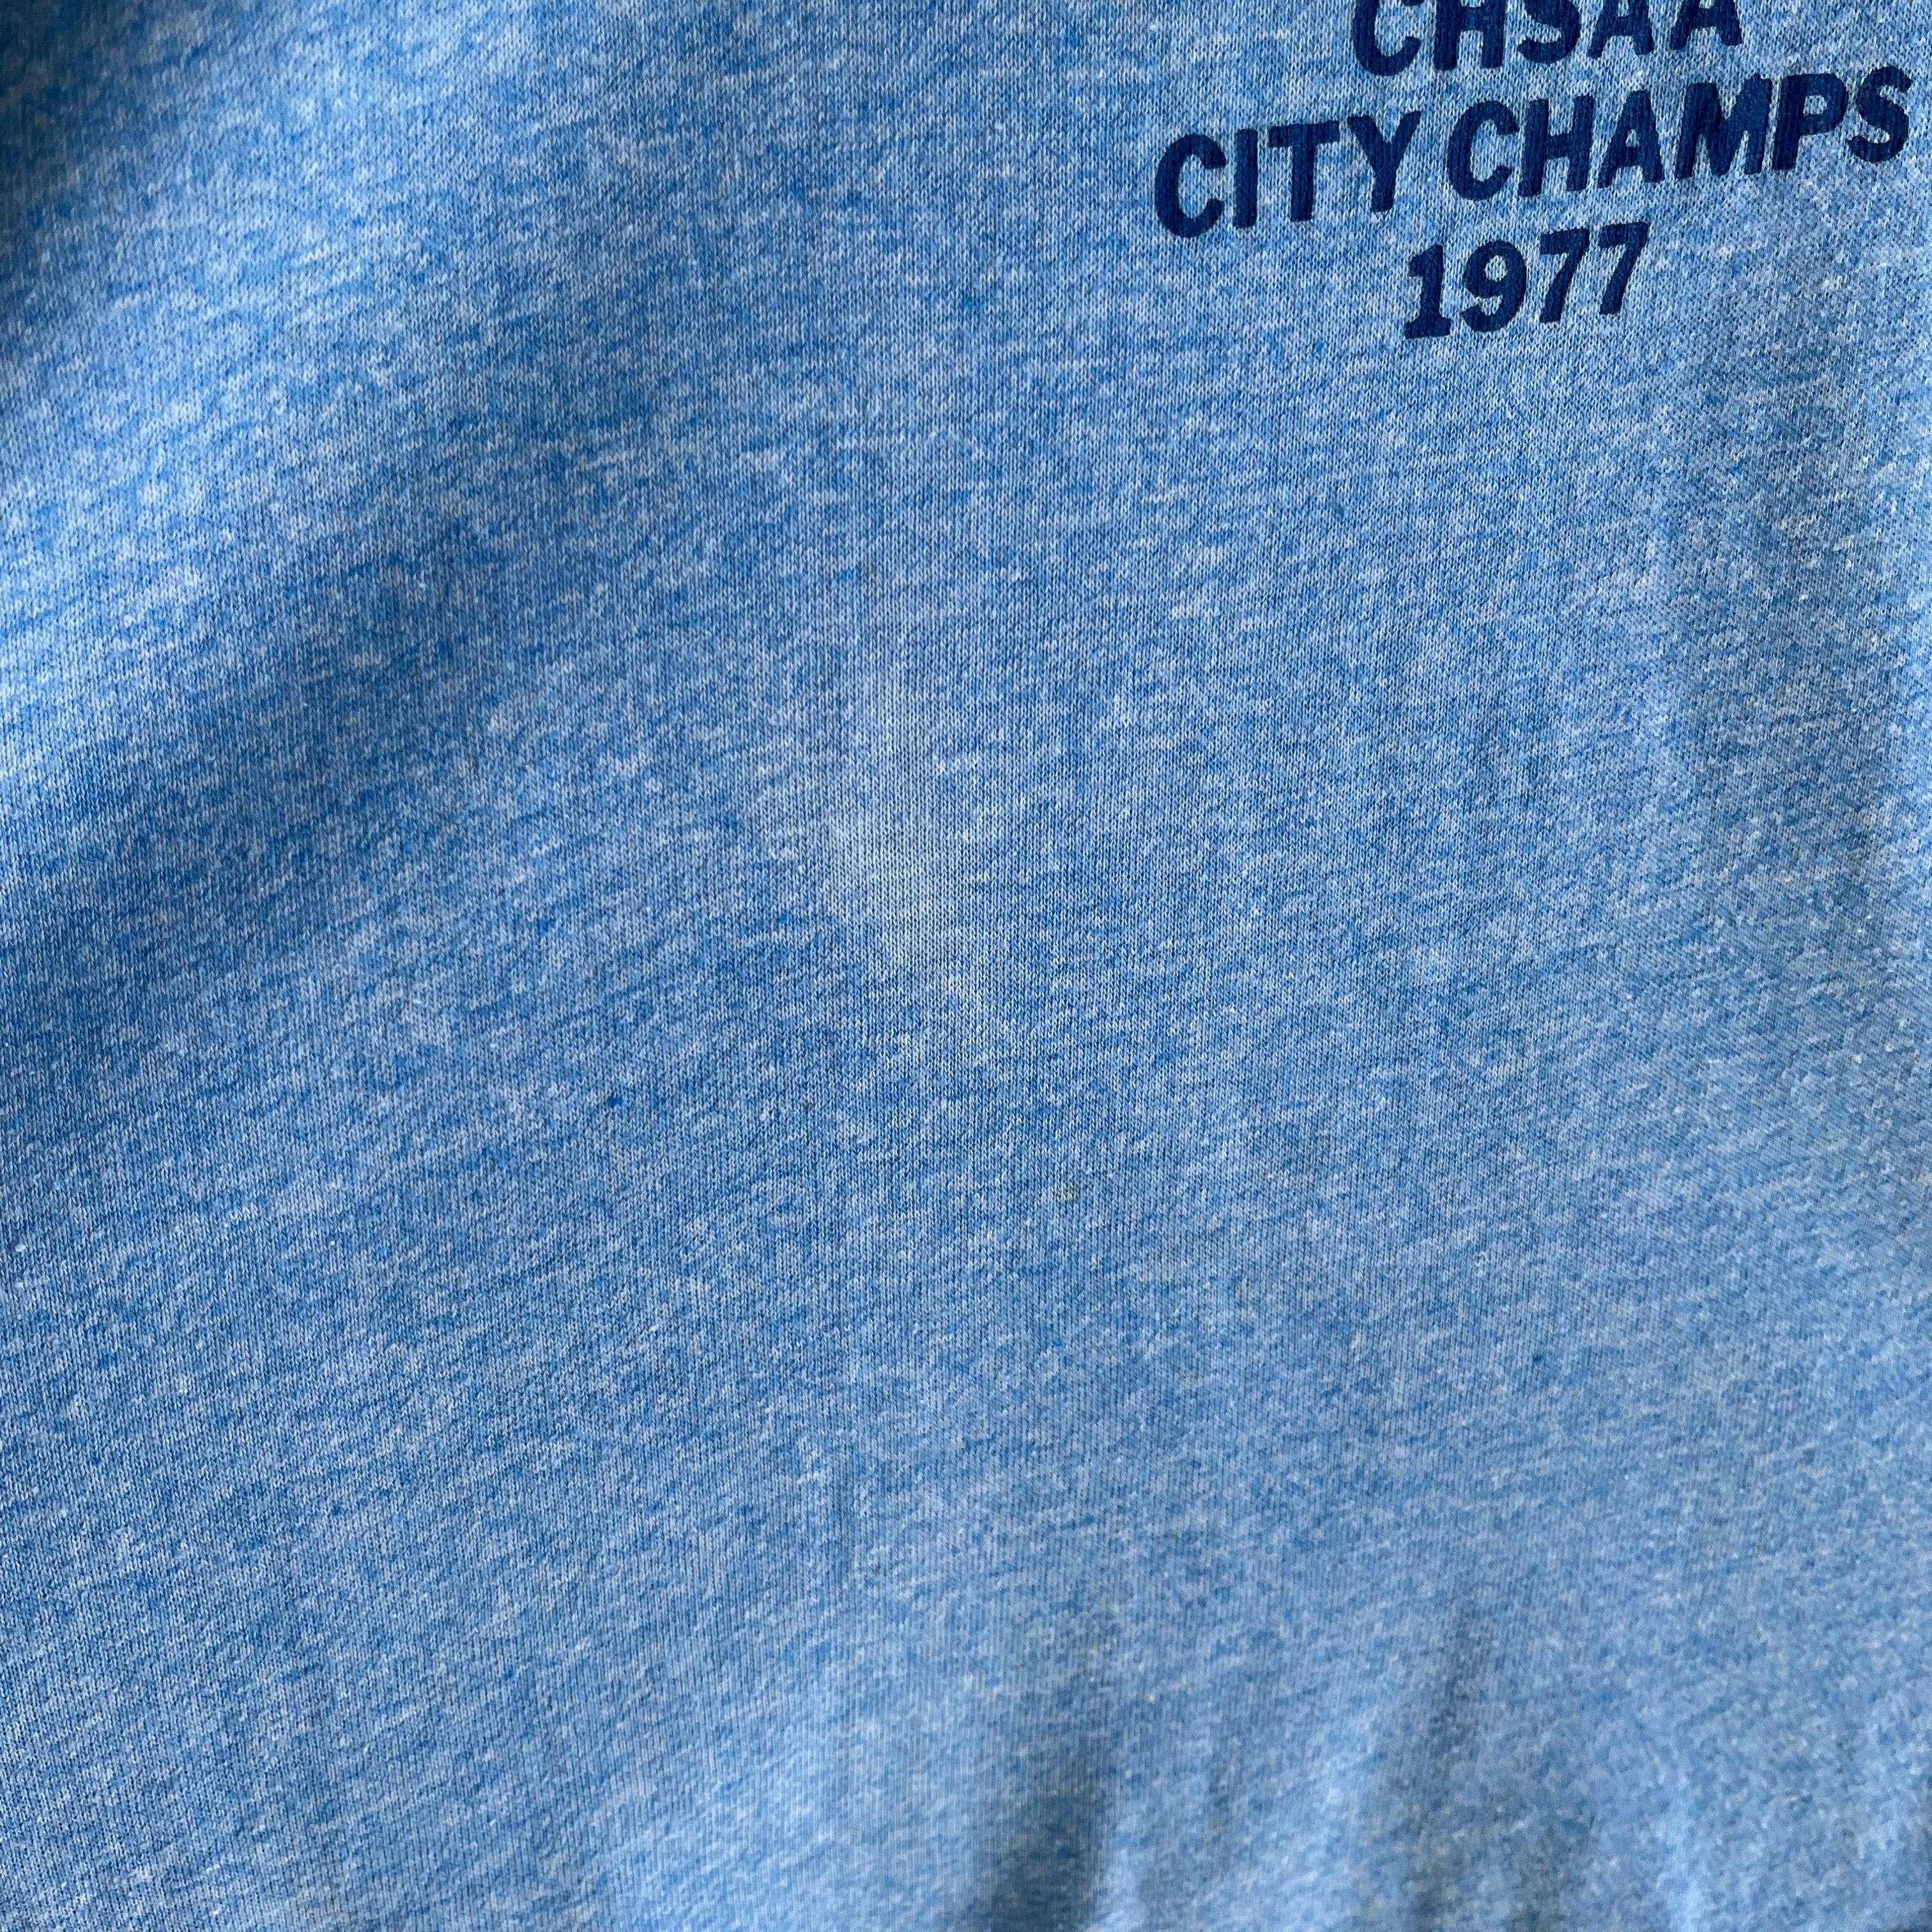 1977 St. Francis Prep CHSAA City Champs Ring T-Shirt by Russell